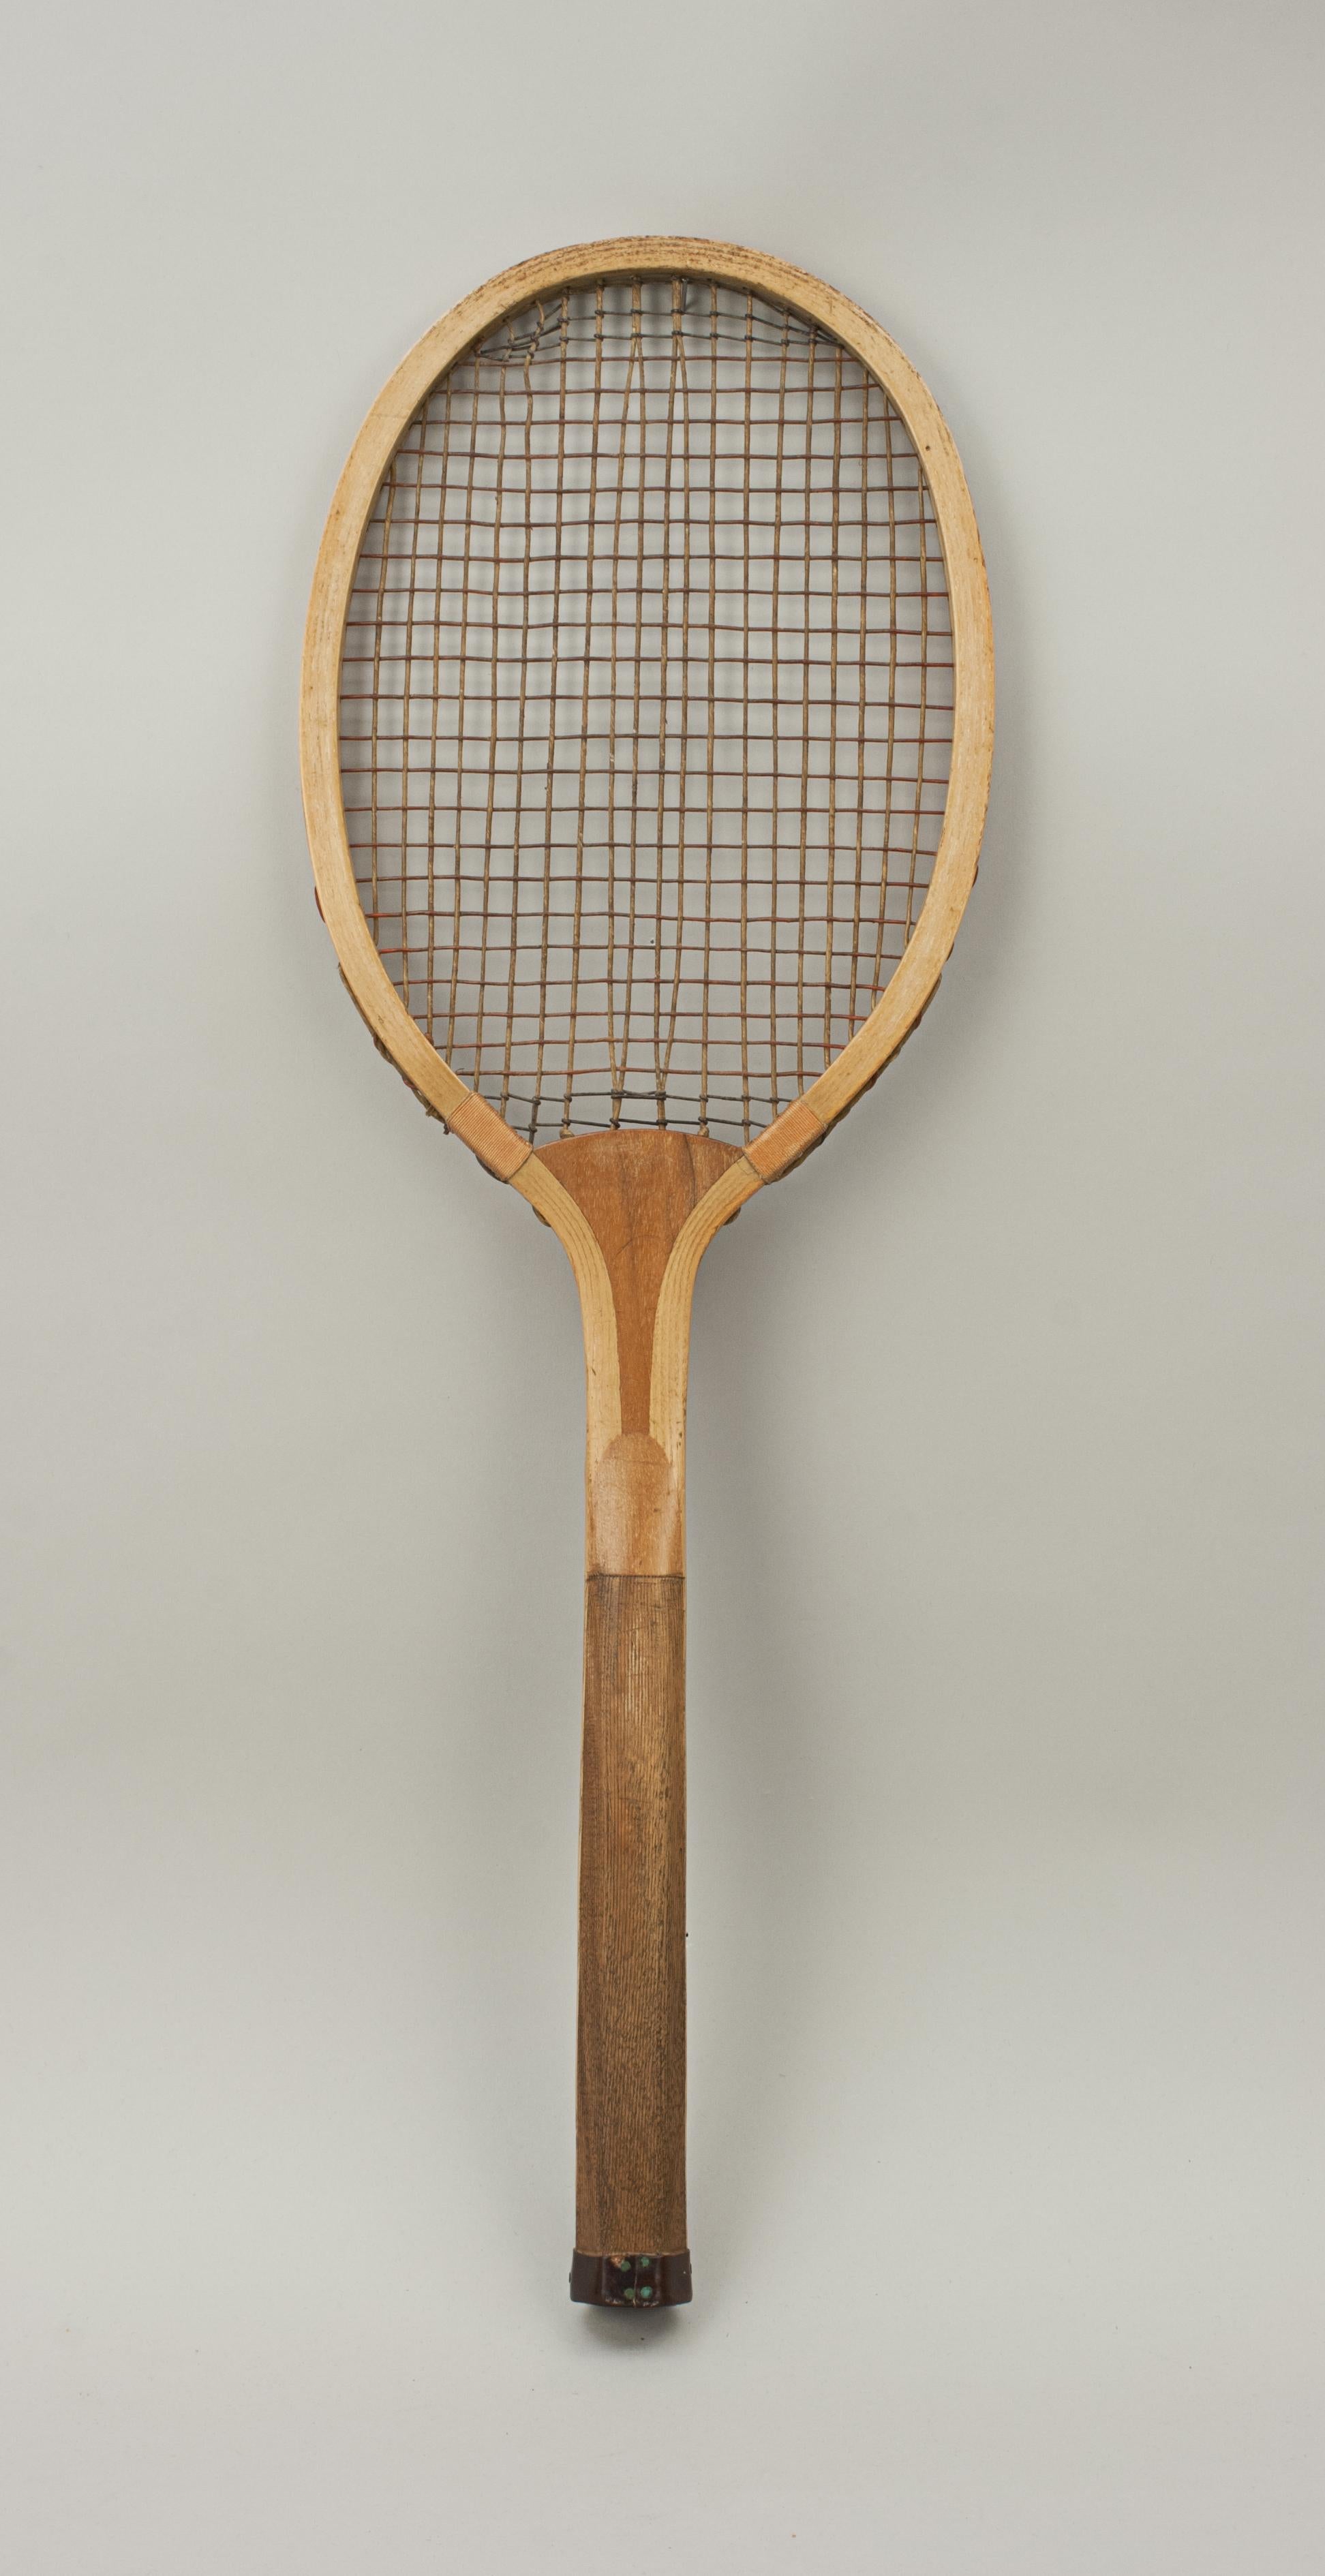 Wooden Lawn Tennis Racket, the Service, Ltc In Good Condition For Sale In Oxfordshire, GB